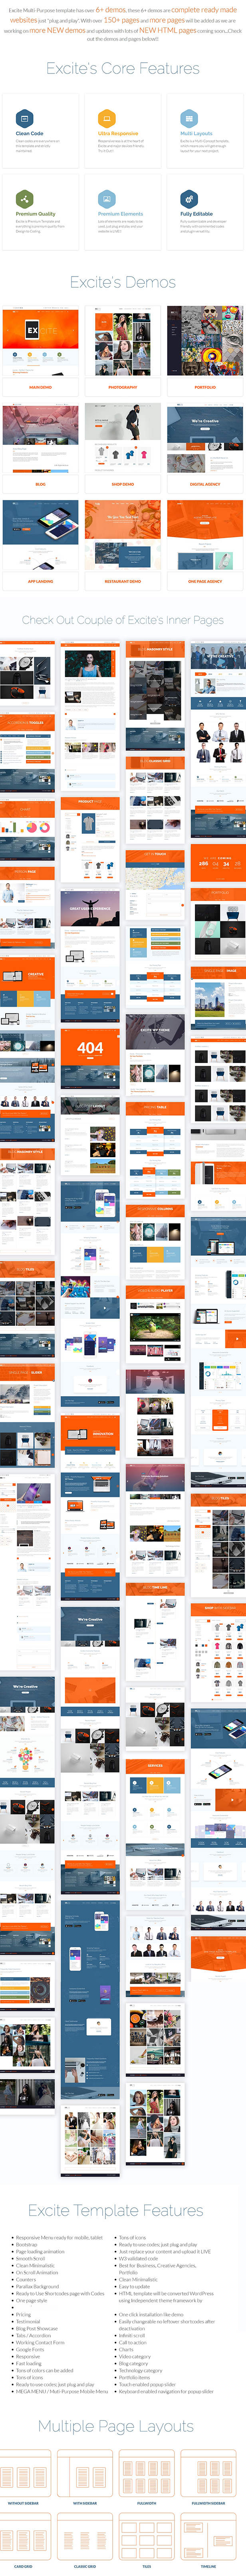 Excite - High Definition Multi-Purpose Clean HTML5 Responsive Bootstrap Template - 2